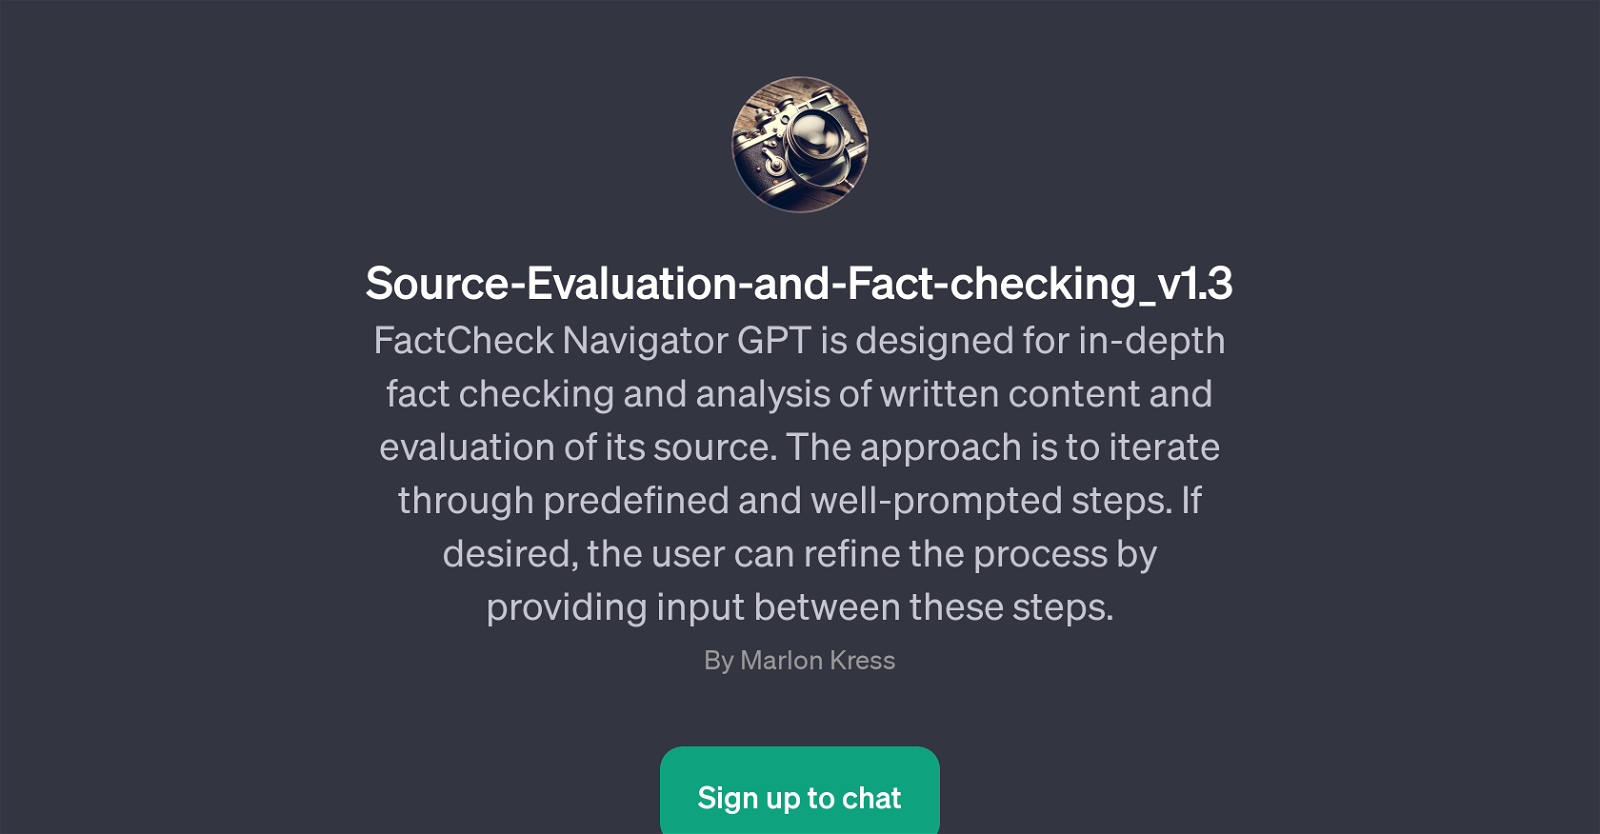 Source-Evaluation-and-Fact-checking_v1.3 website